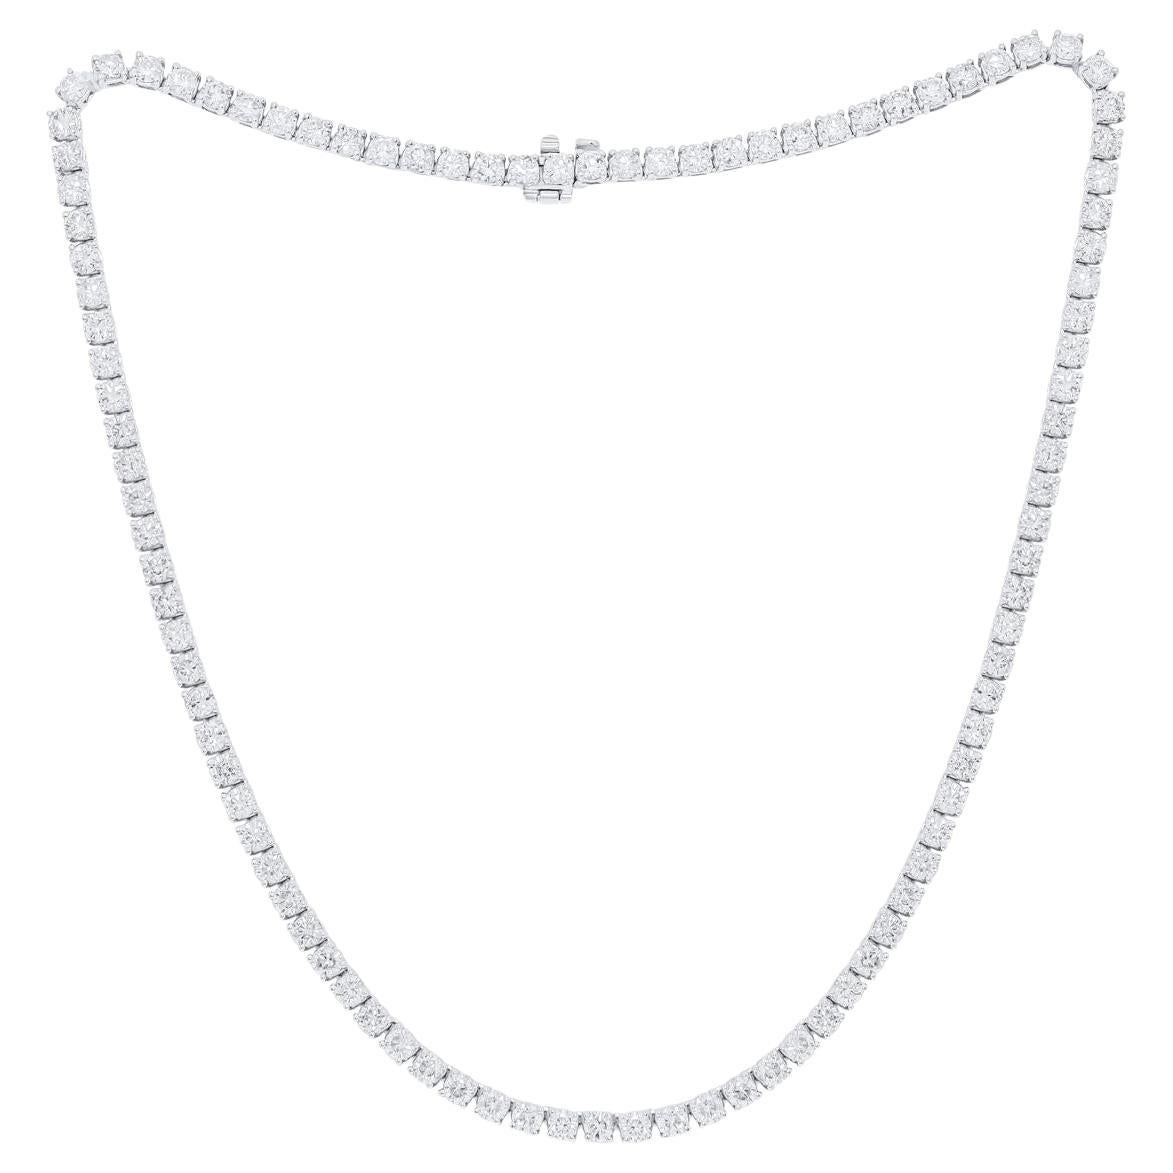 Diana M. 18 kt white gold, 16" 4 prong diamond tennis necklace containing 21.25  For Sale